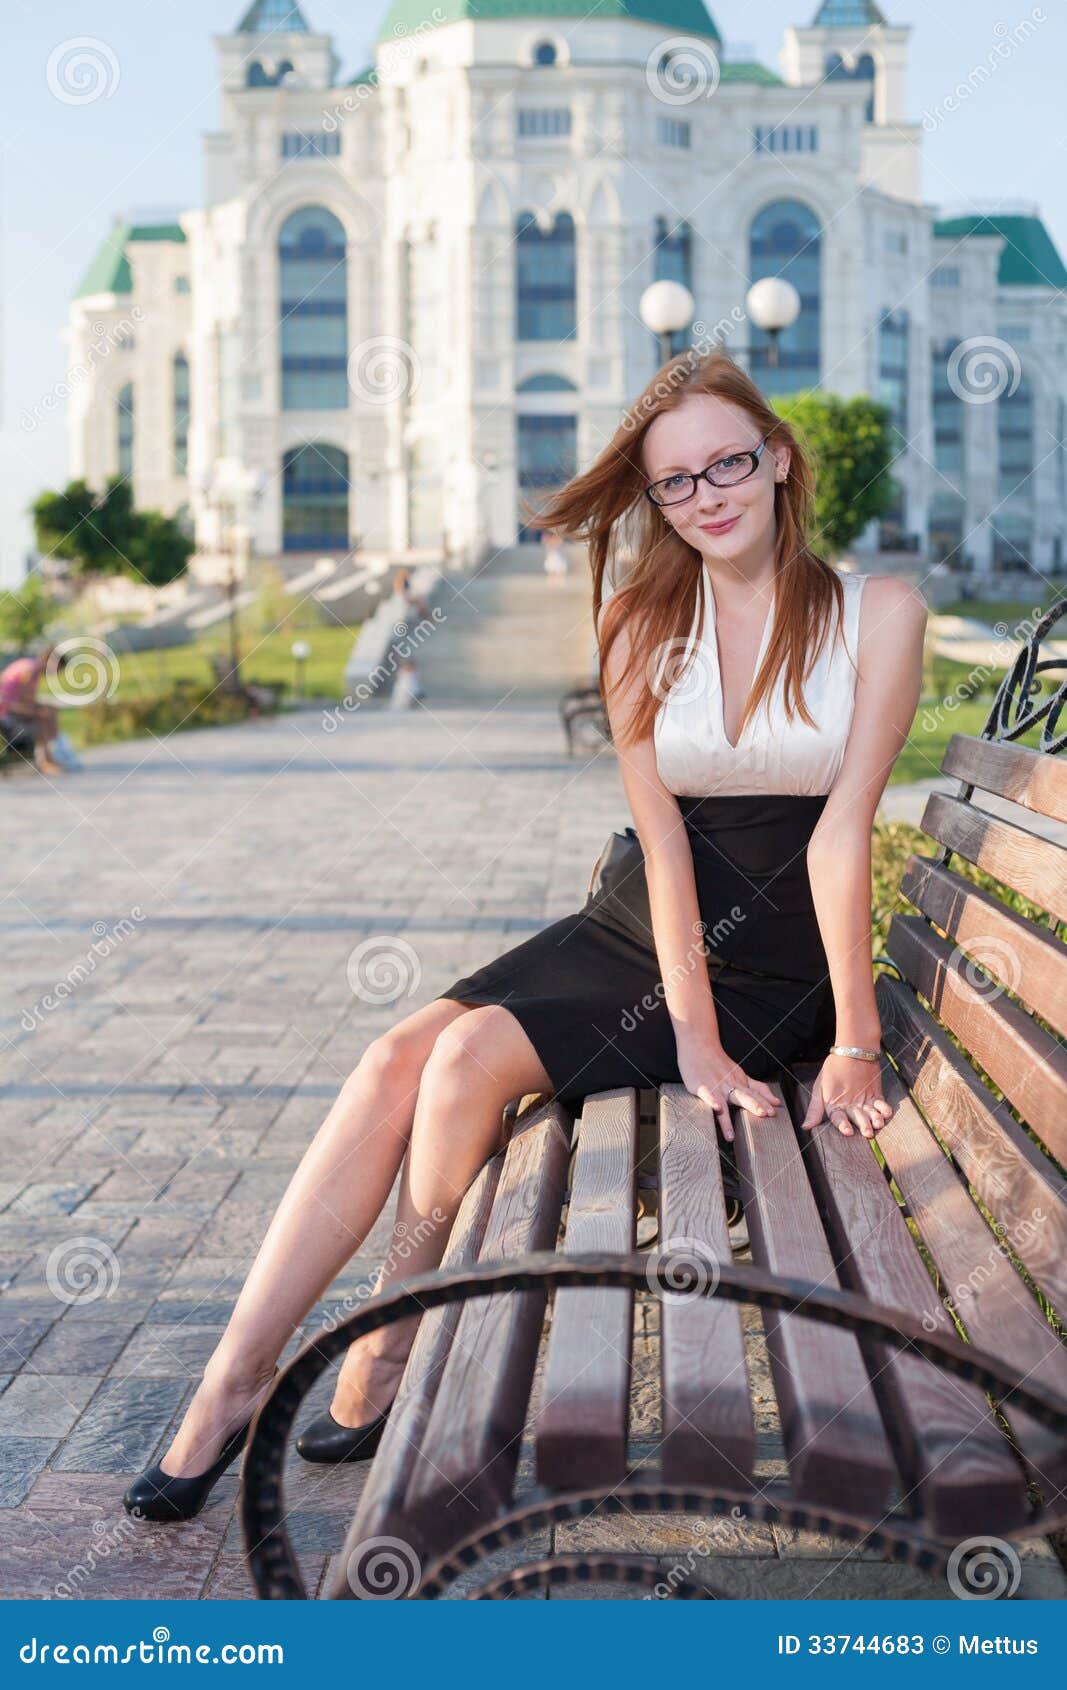 Pretty Teen Girl Sitting On The Bench Stock Image I